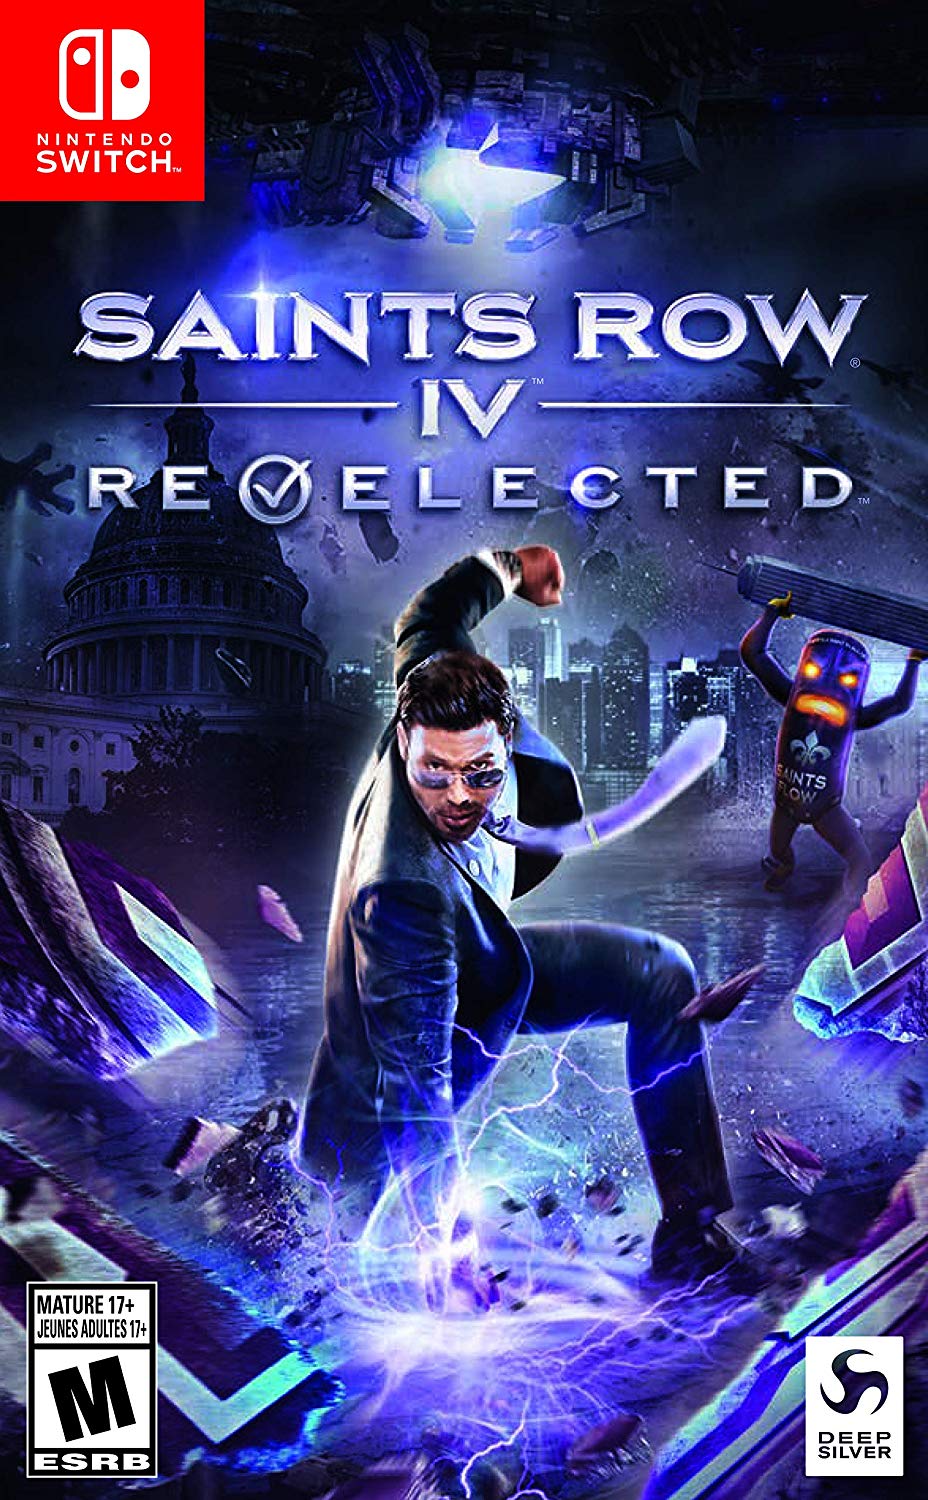 Amazon essentially confirms Saints Row IV for Switch